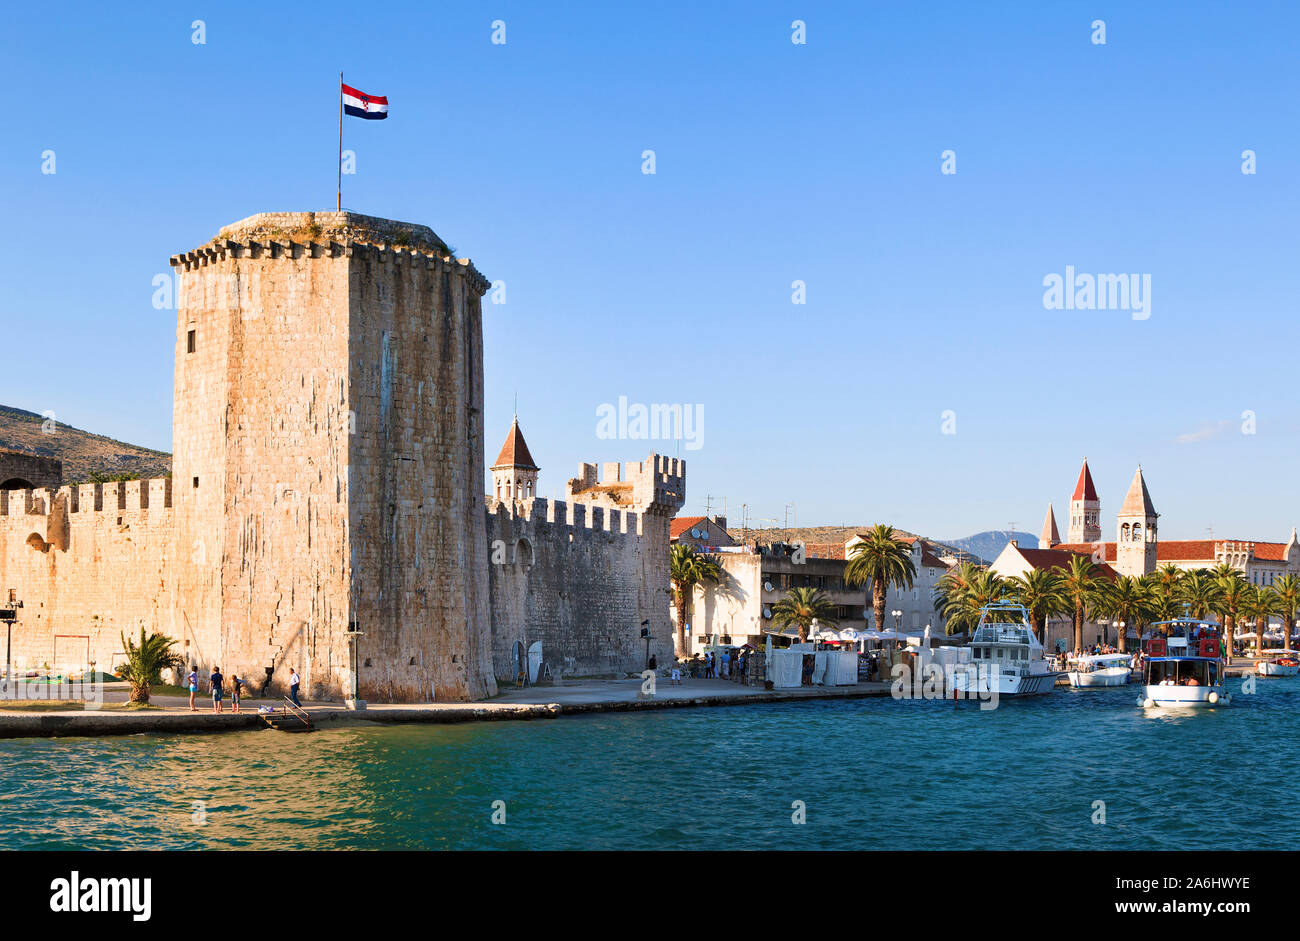 View of the tower of Kamerlengo castle and the Marina of the old Croatian town of Trogir, Dalmatia region, Croatia Stock Photo